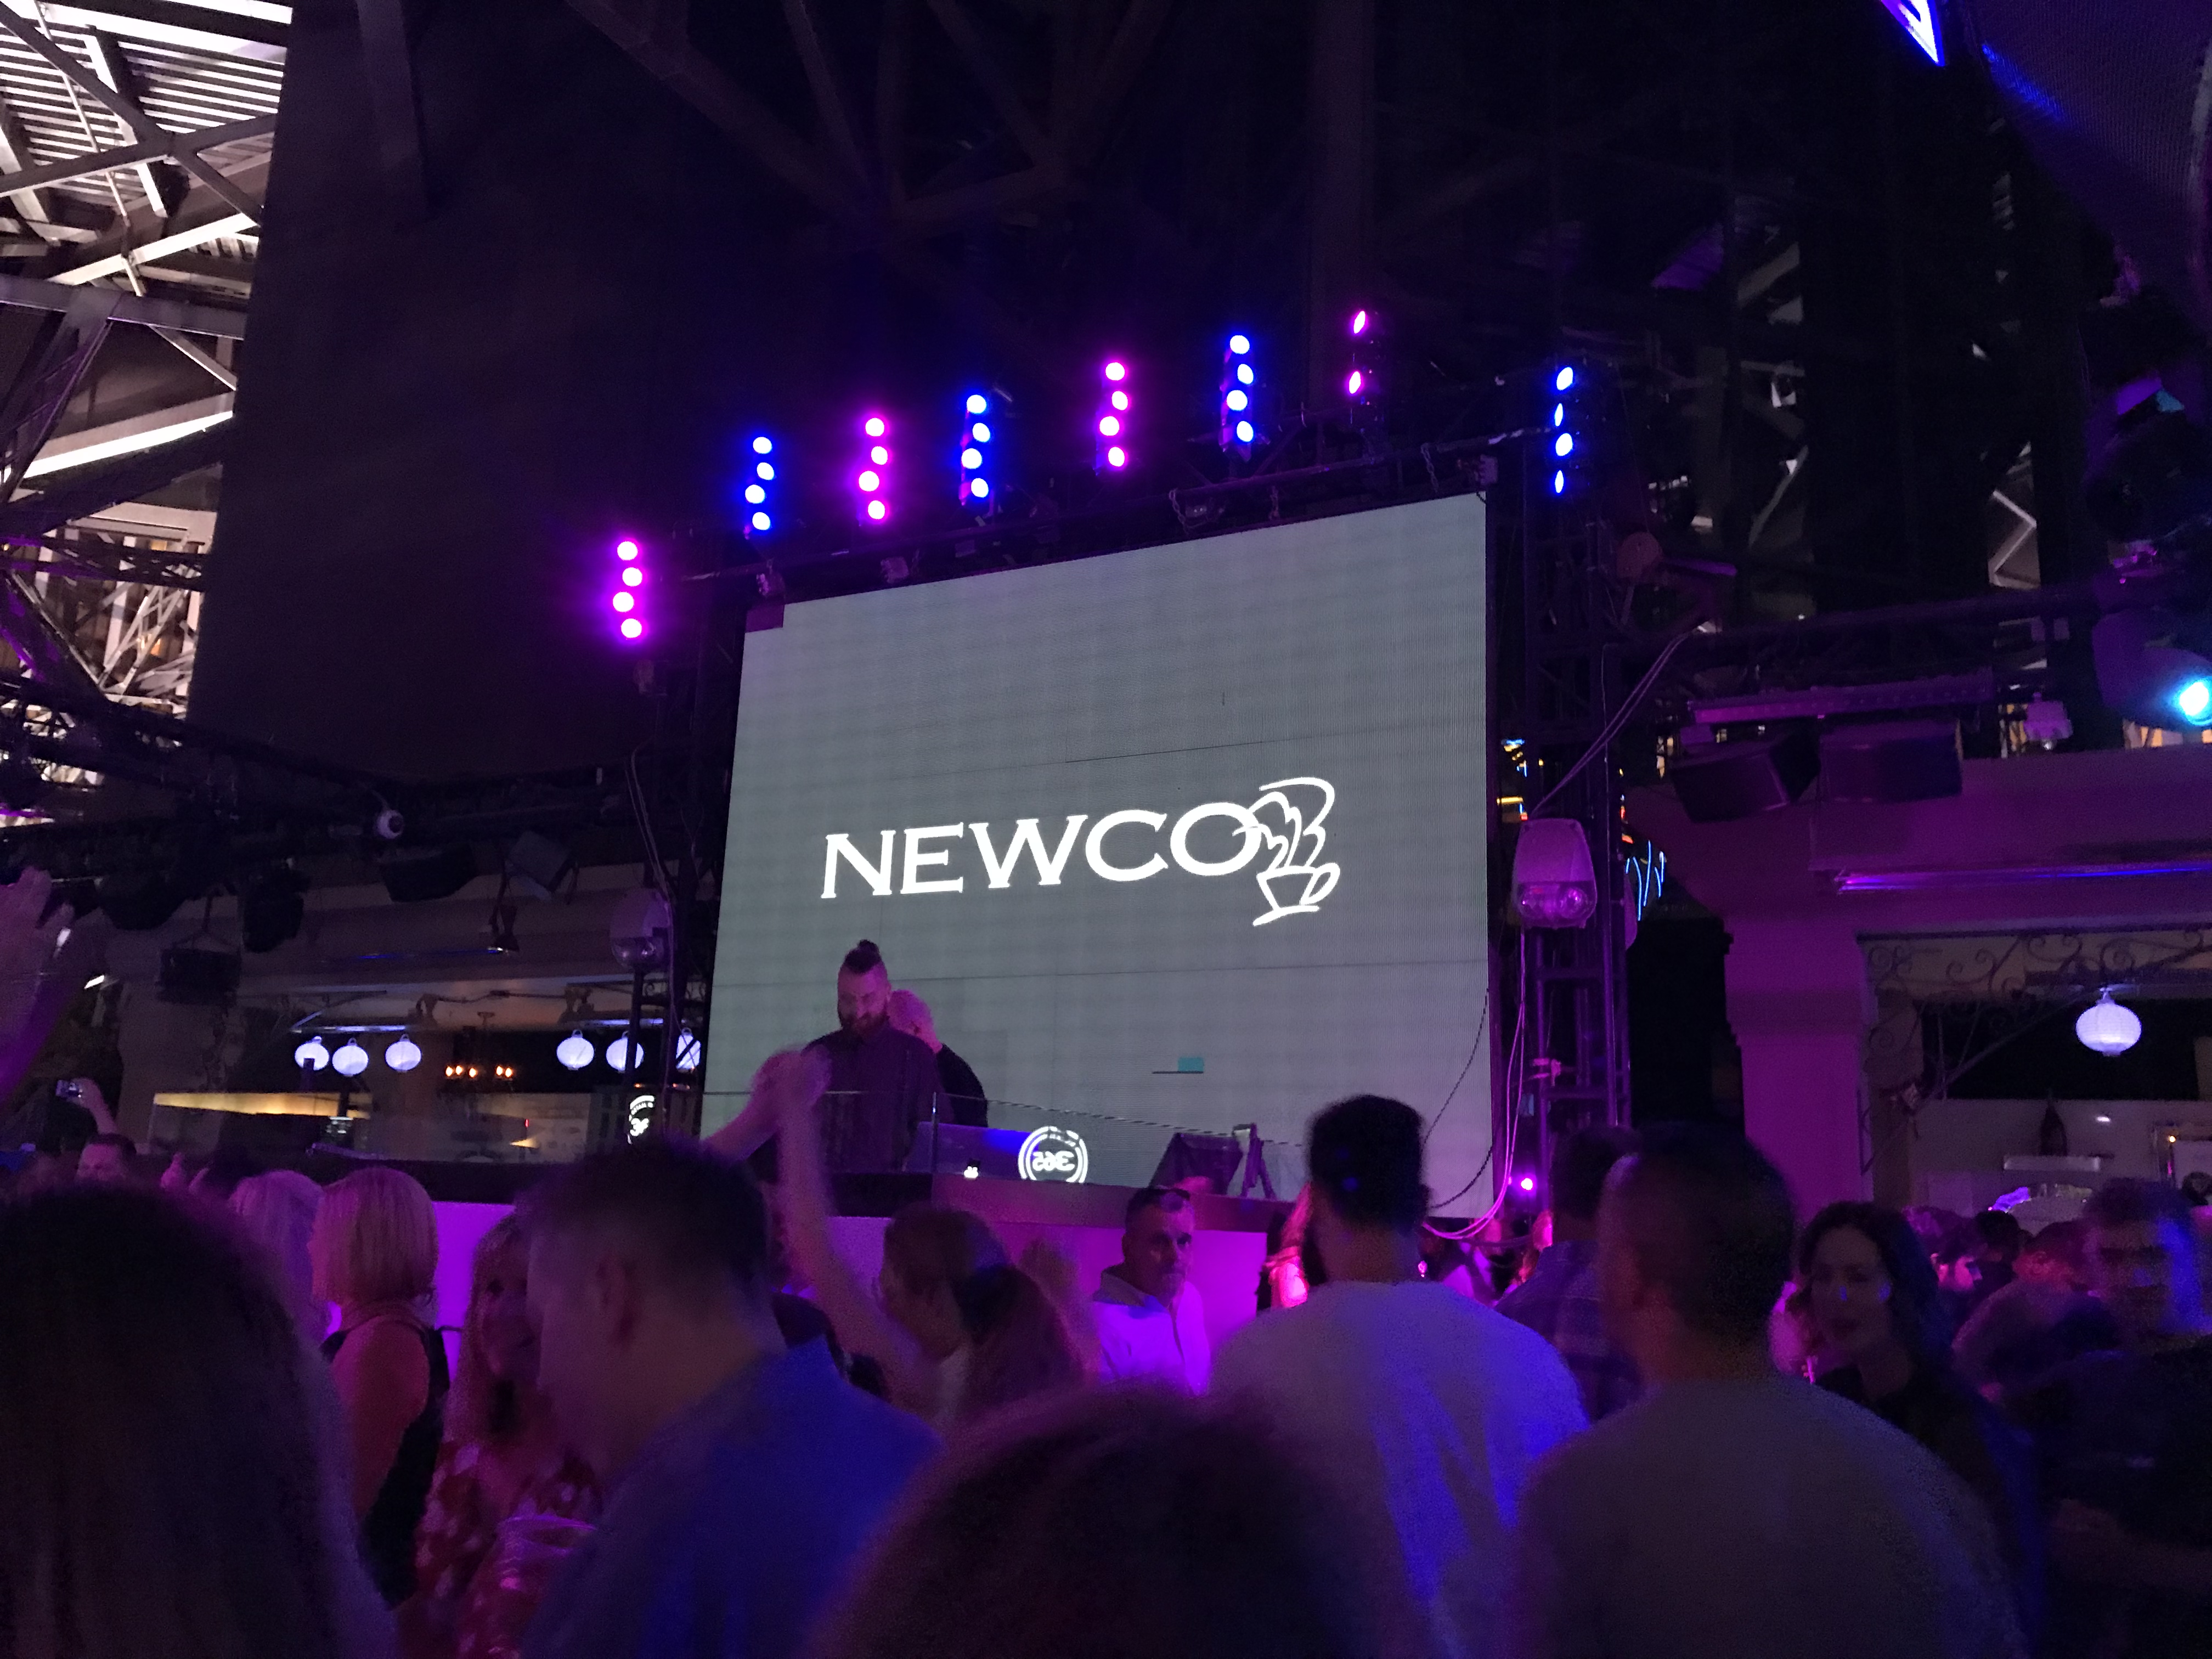 The NAMA Show Party picturing the dj and Newco logo on the screen.